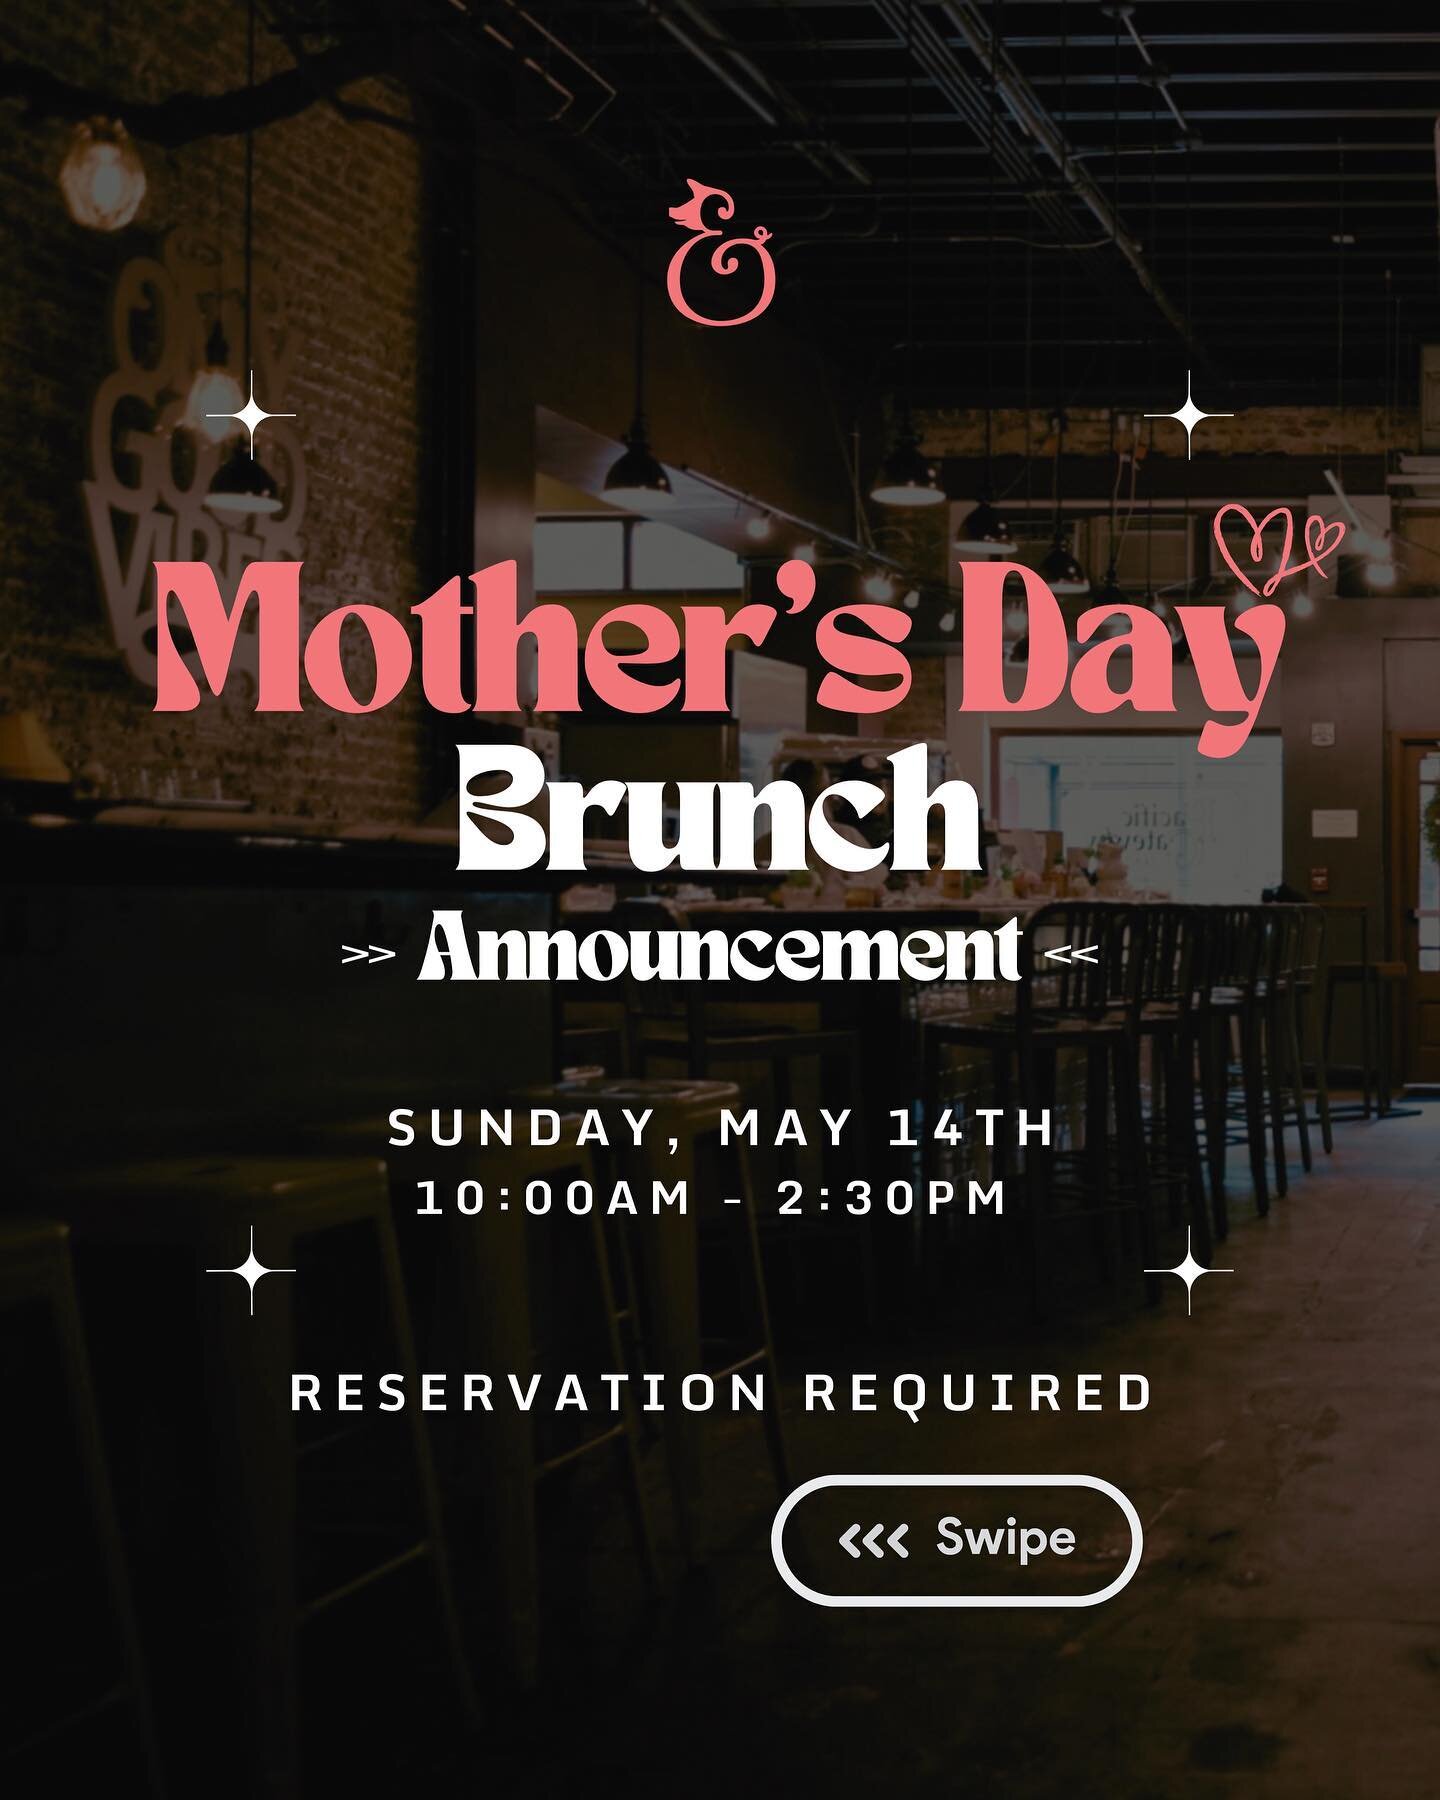 Mother&rsquo;s Day Brunch *Announcement*

Attention Last minute Mothers Day diners! 
Due to popular demand we have opened up seating for large parties in our upstairs private dining room. We can seat parties of 6 or more from 10 am to 2pm. Limited av